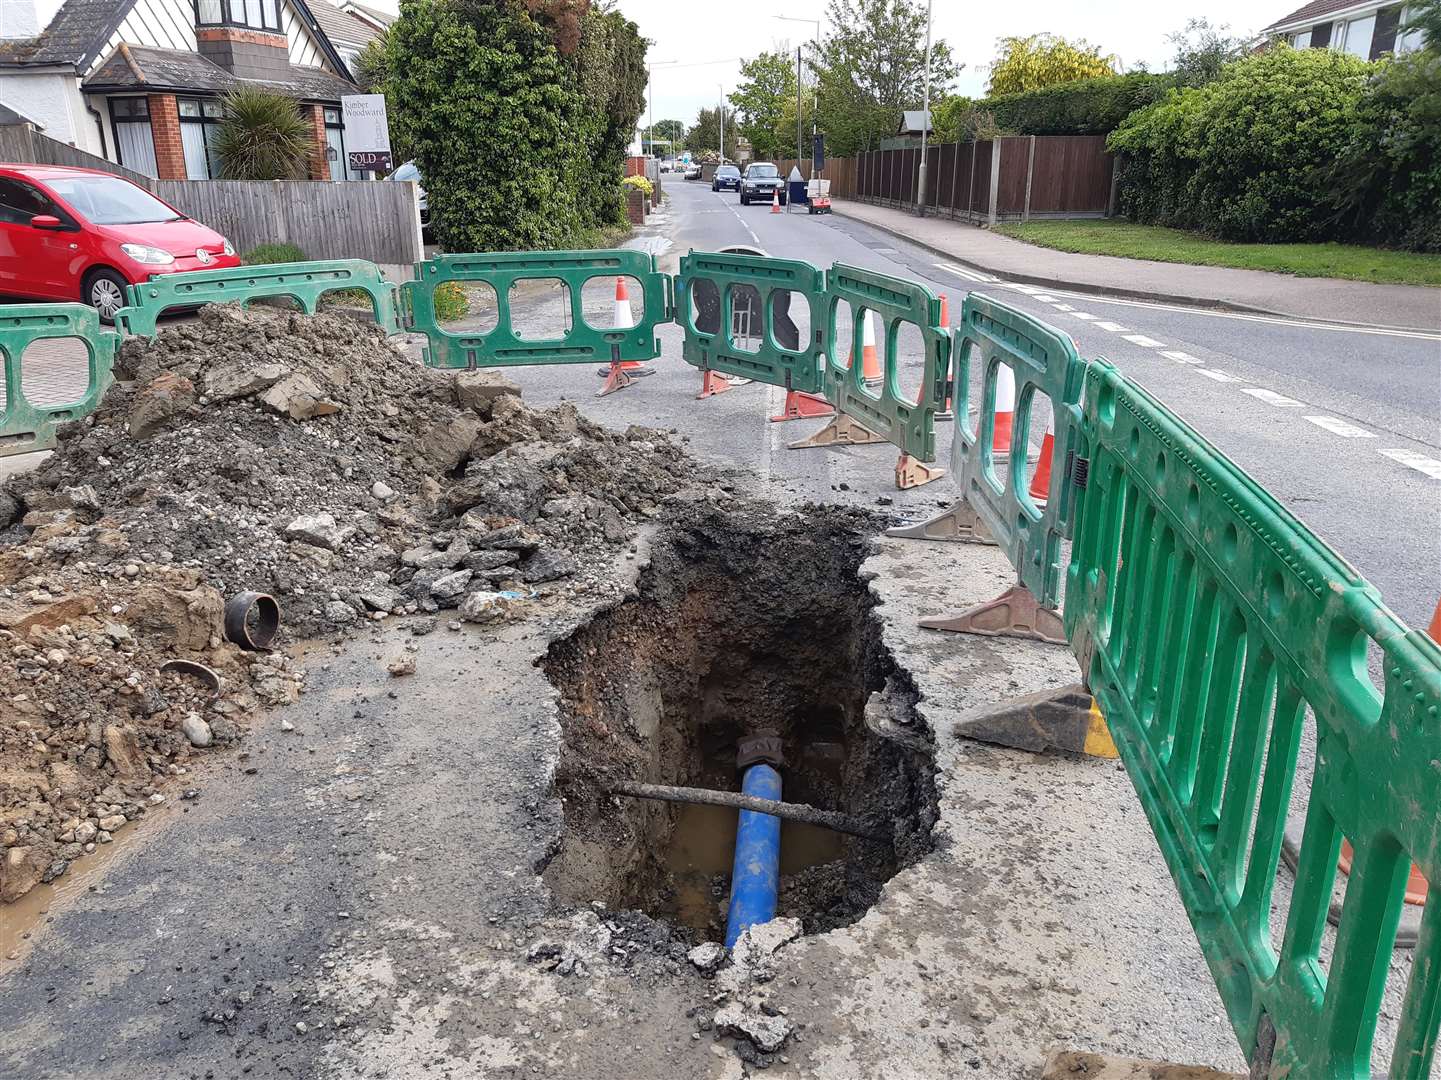 The first burst main in Herne Bay occurred at about 9.30am on Saturday